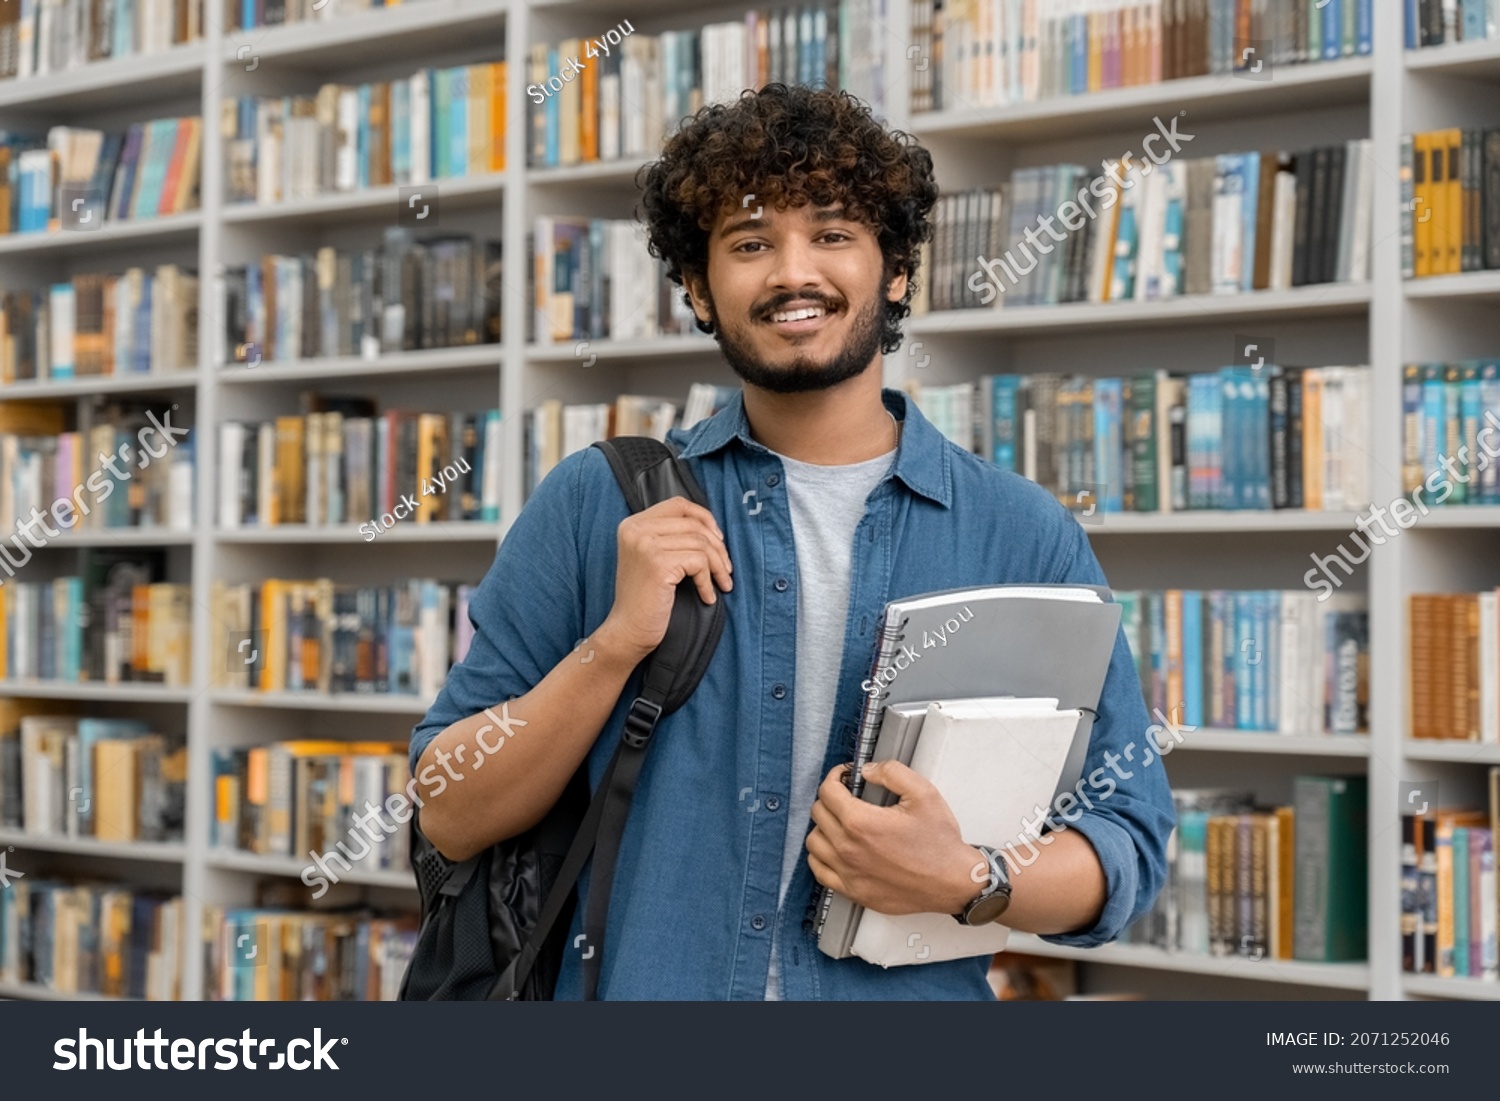 Portrait of cheerful male international Indian student with backpack, learning accessories standing near bookshelves at university library or book store during break between lessons. Education concept #2071252046